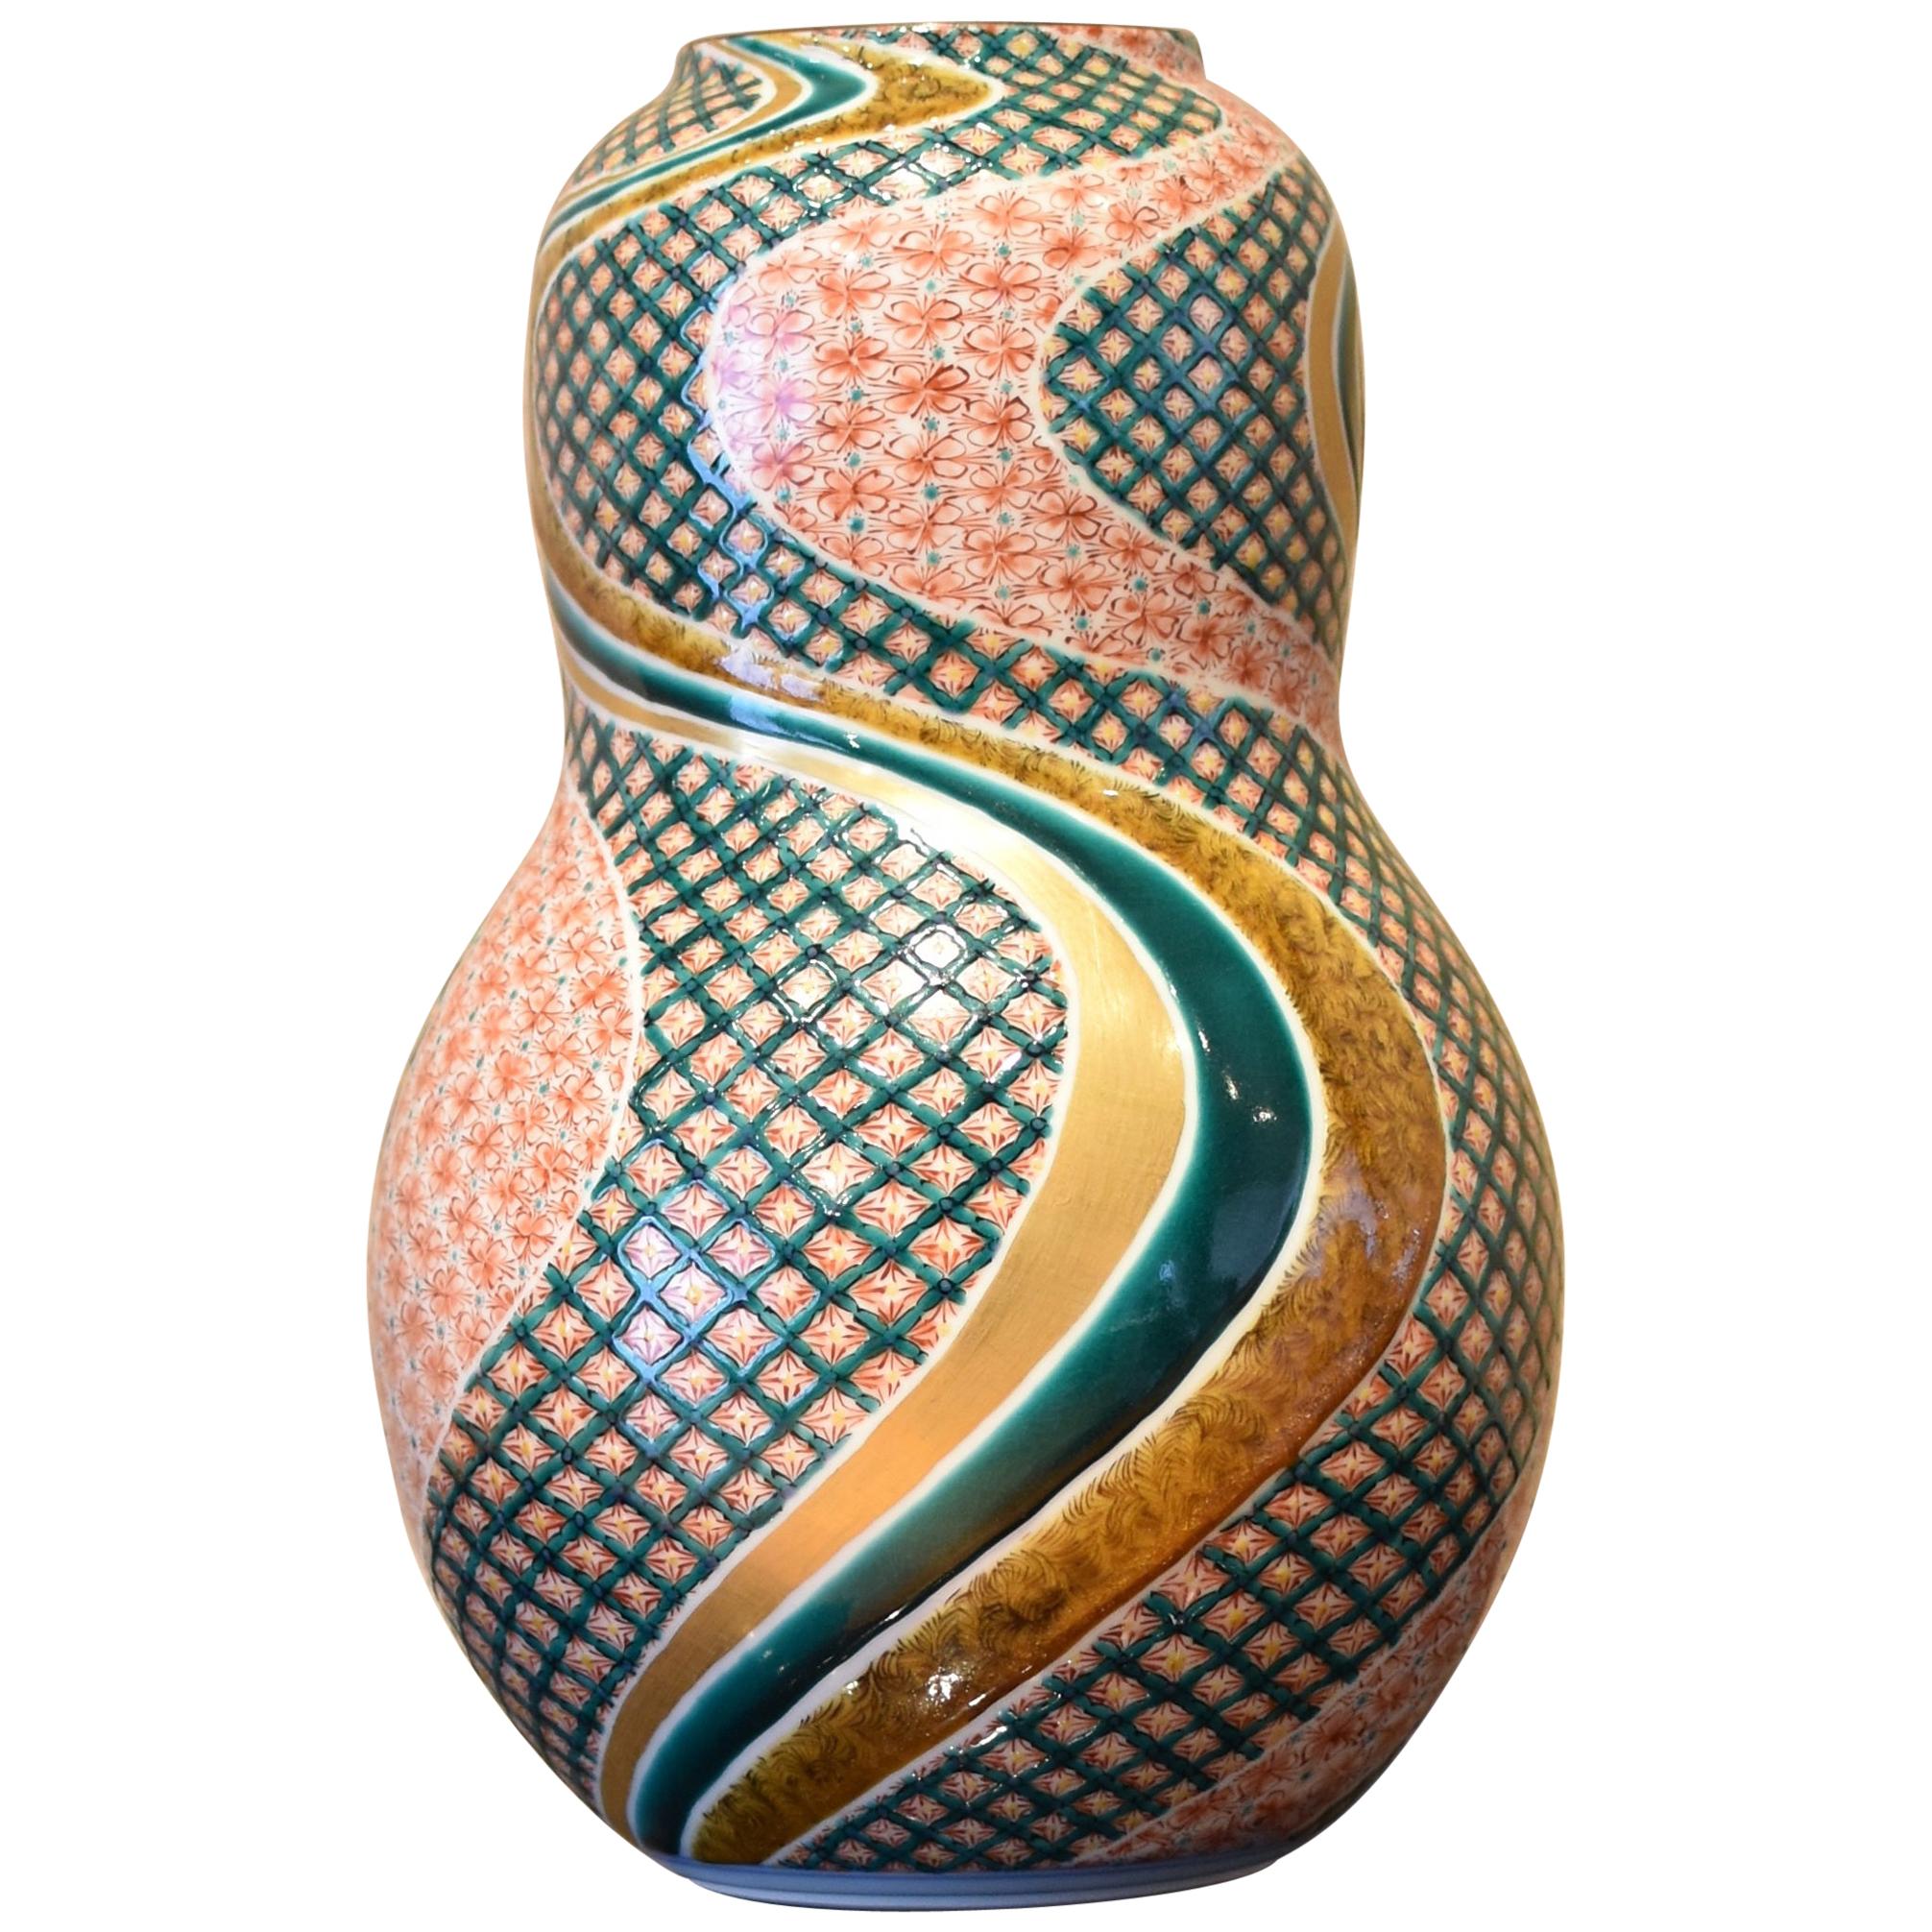 Japanese Contemporary Green Red Gold Porcelain Vase by Master Artist